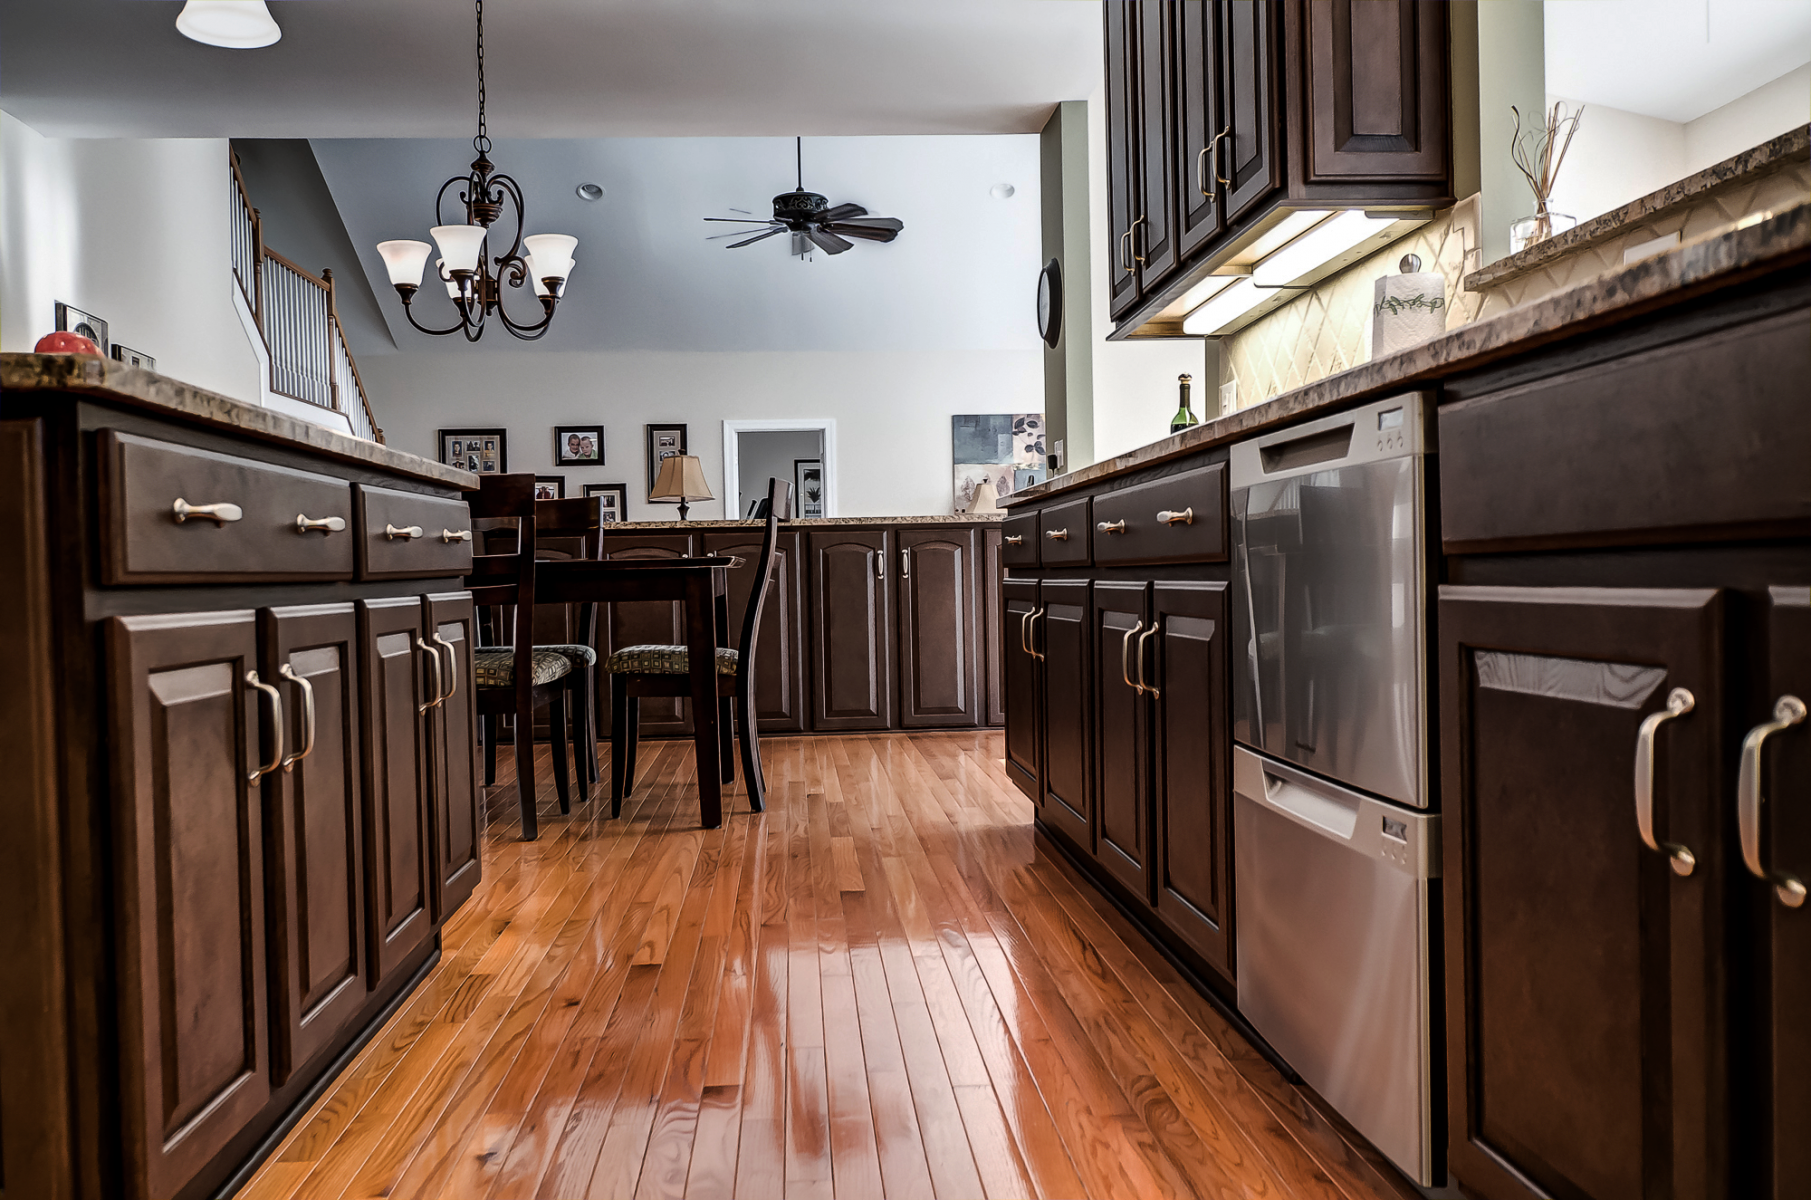 Kitchen cabinet refinishing - in a rich furniture finish